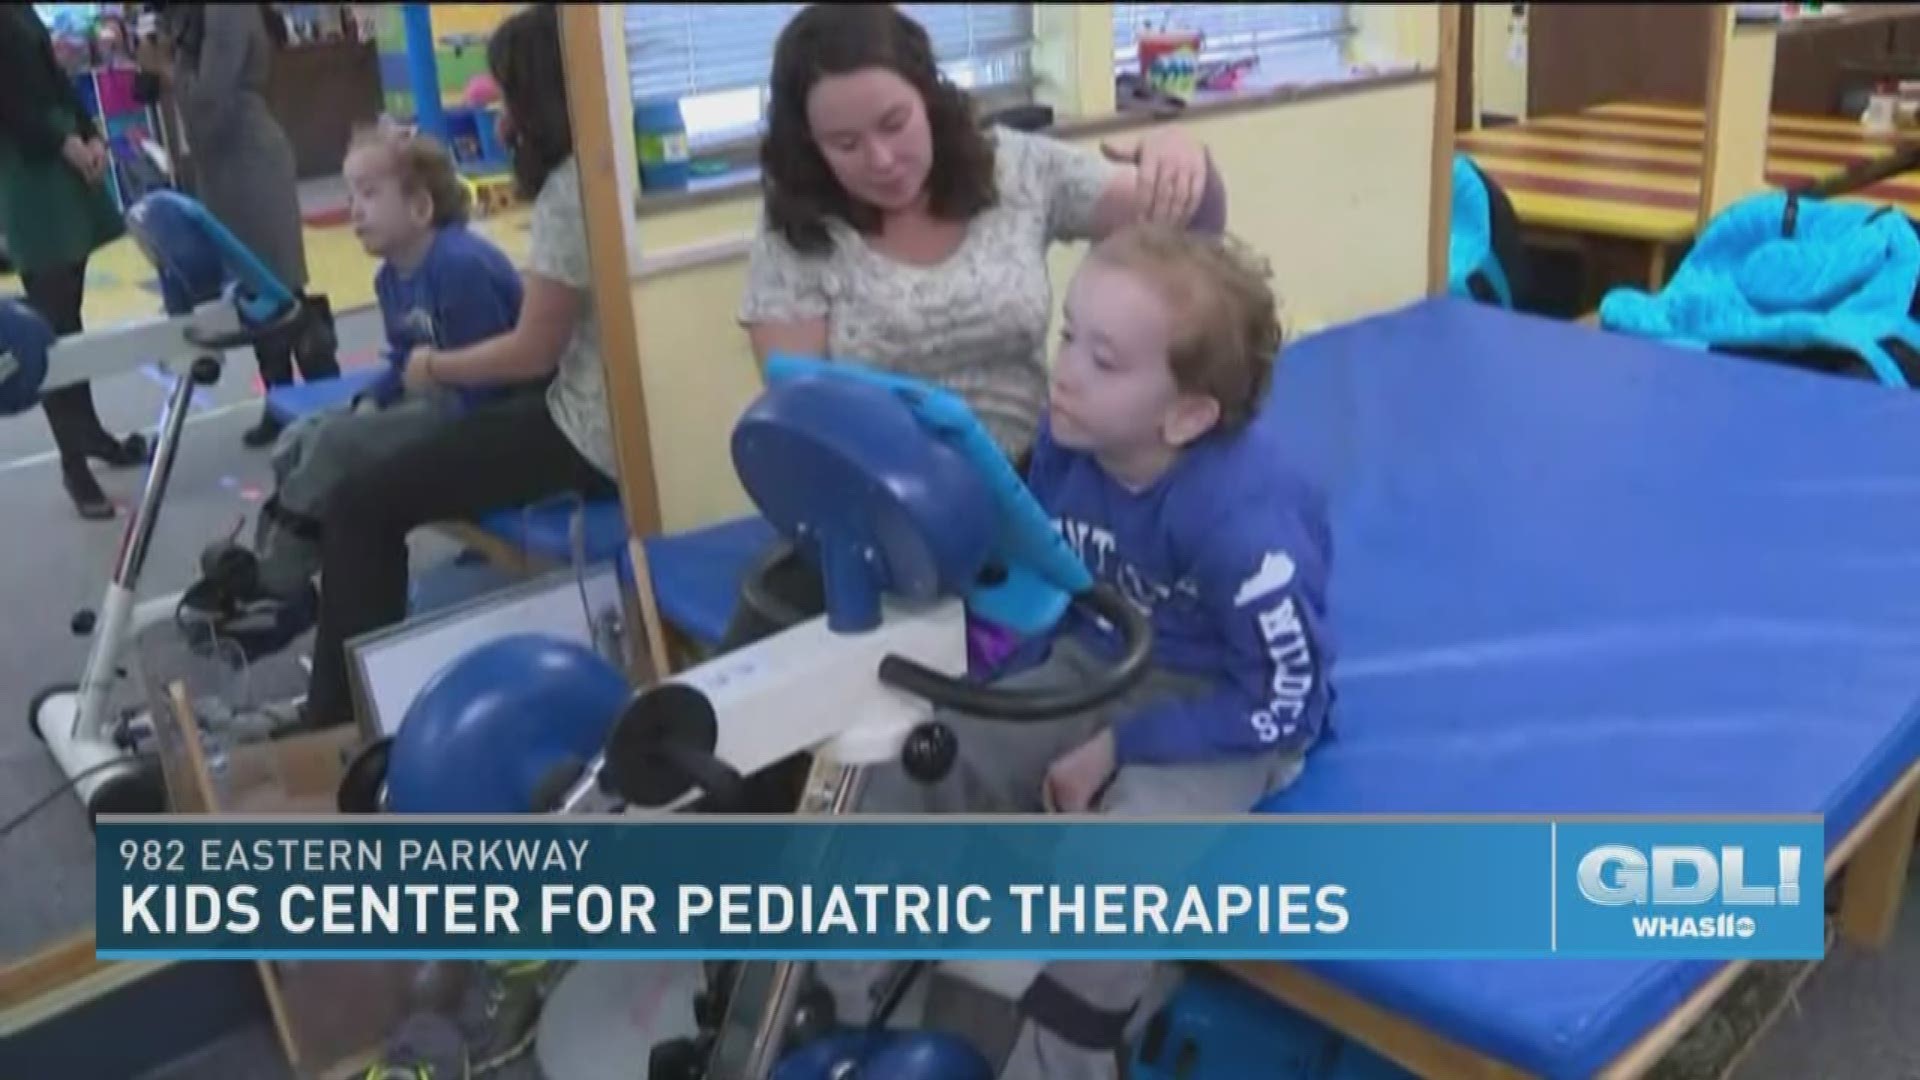 For 60 years, kids in Kentuckiana have been getting physical, occupational and speech therapies for their special needs at Kids Center for Pediatric Therapies.